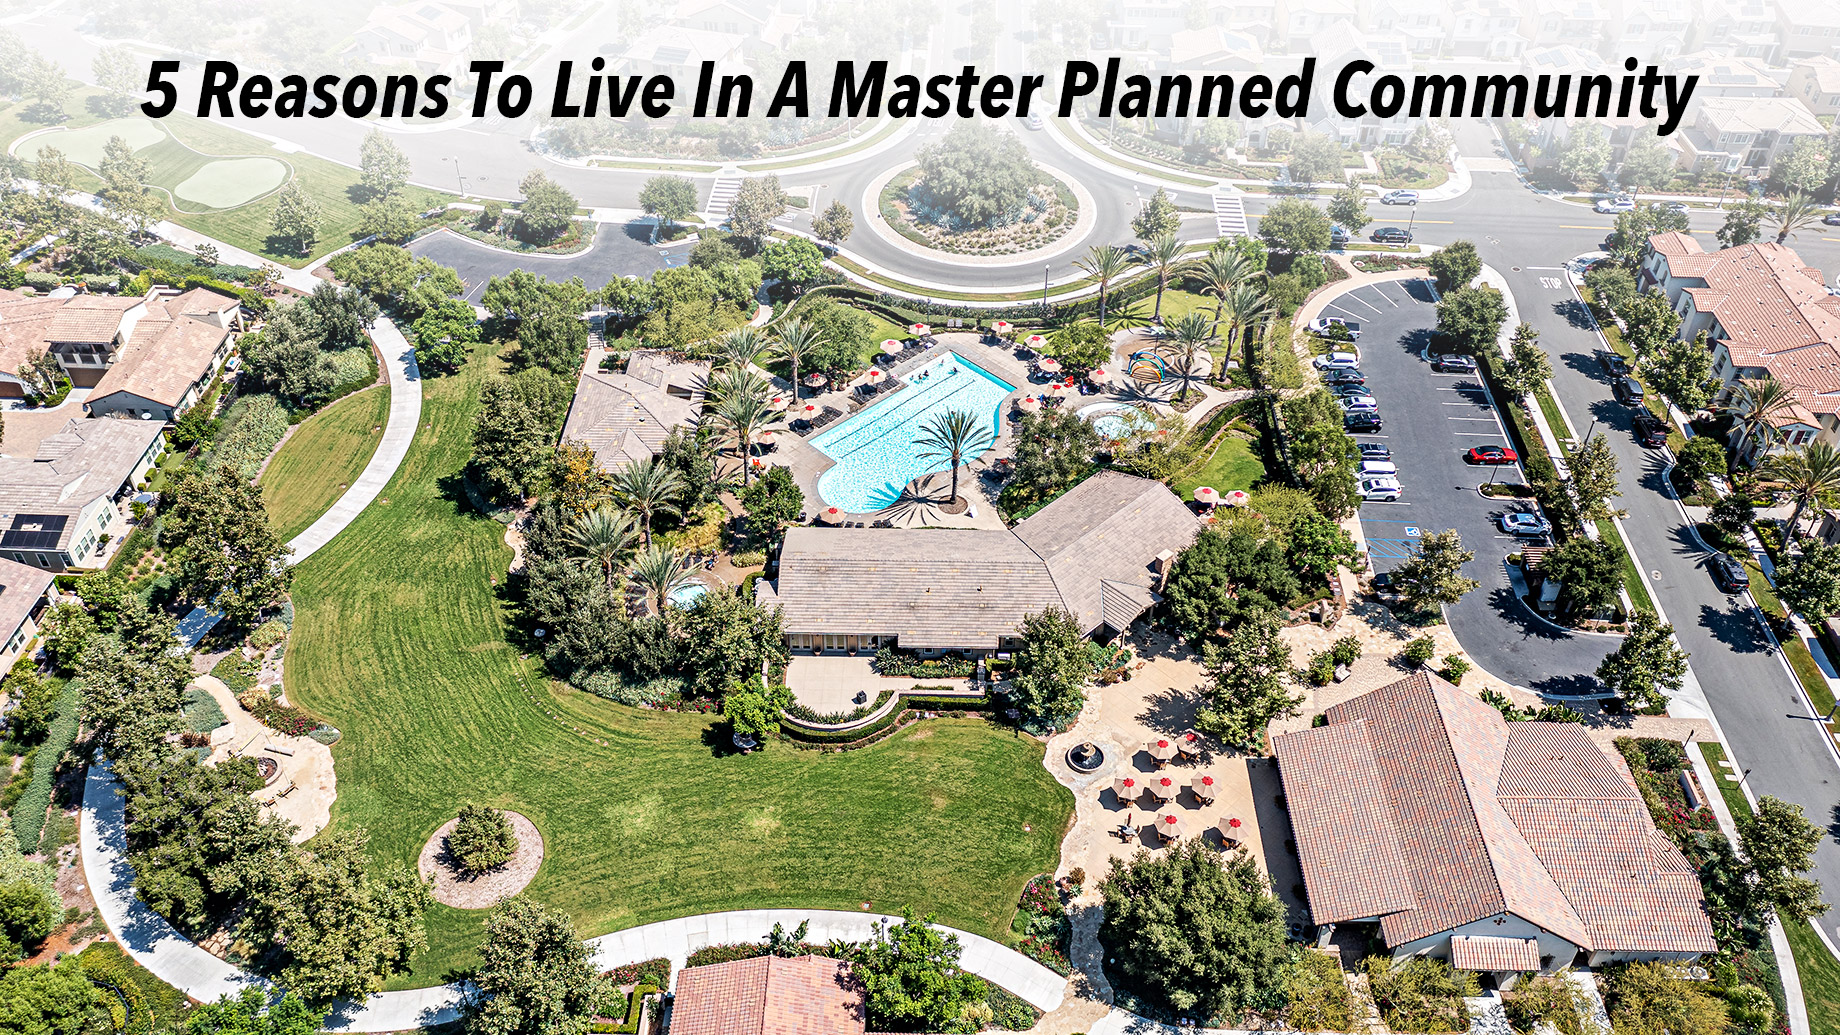 5 Reasons To Live In A Master Planned Community